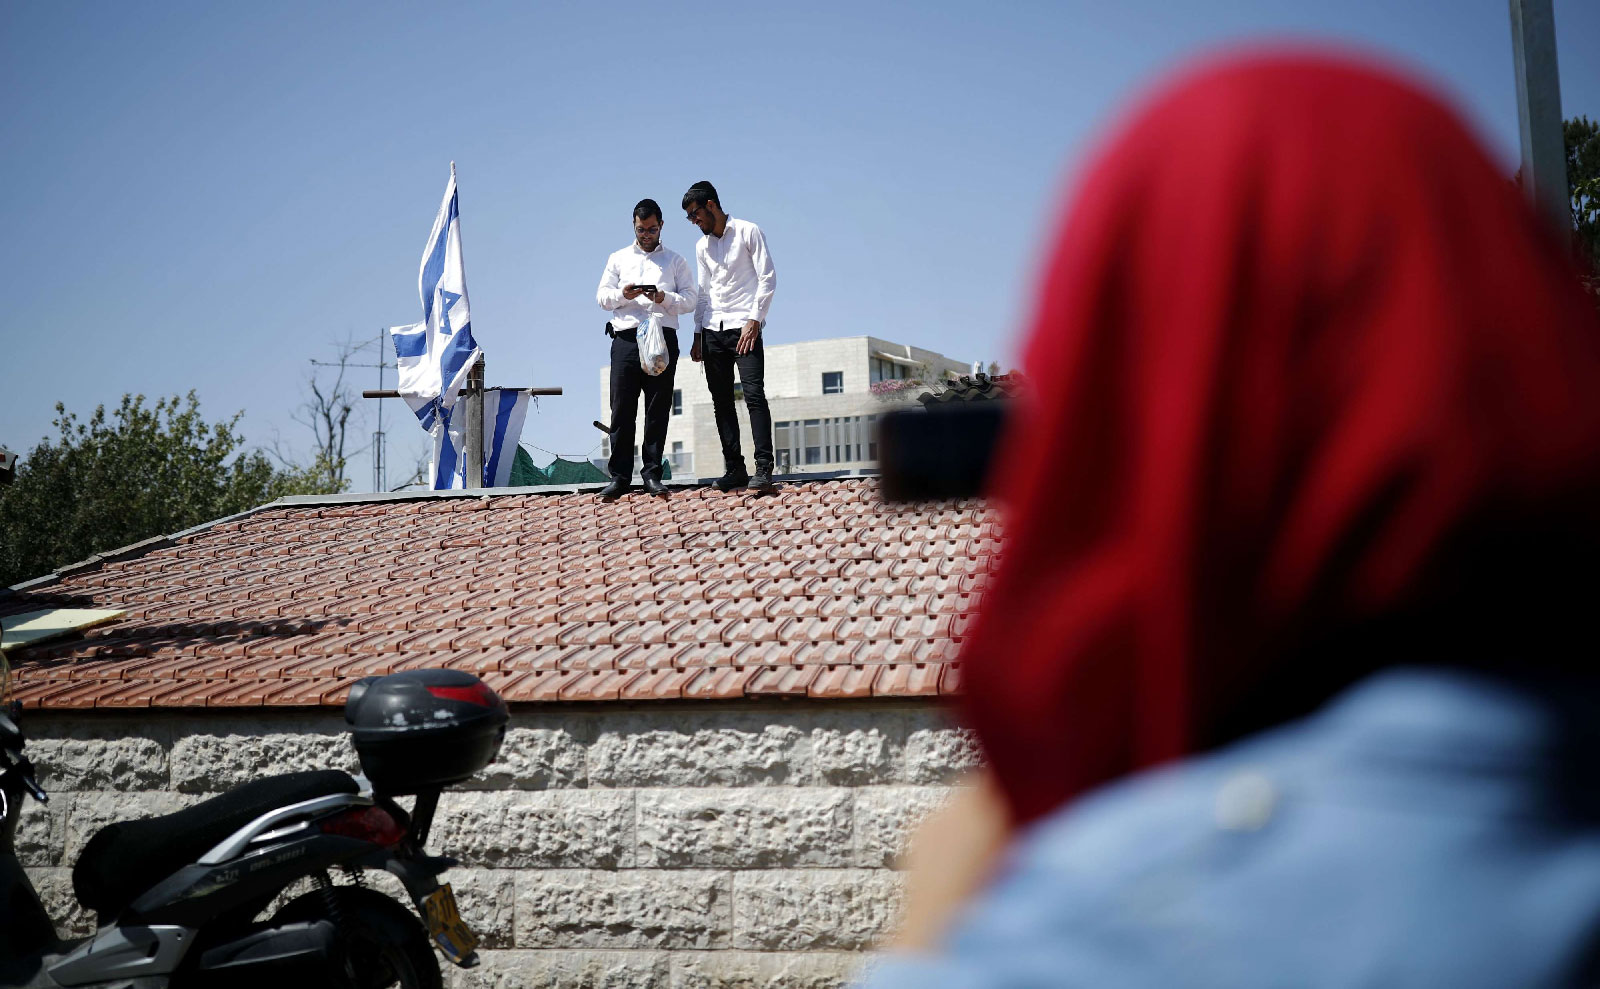 Religious Jewish men stand on the roof of a house seized by new Jewish owners in the Arab neighbourhood of Sheikh Jarrah in east Jerusalem on September 8, 2017, which originally belonged to the Palestinian Shamasneh family in which they lived for over half a century, until they were evicted on September 5.